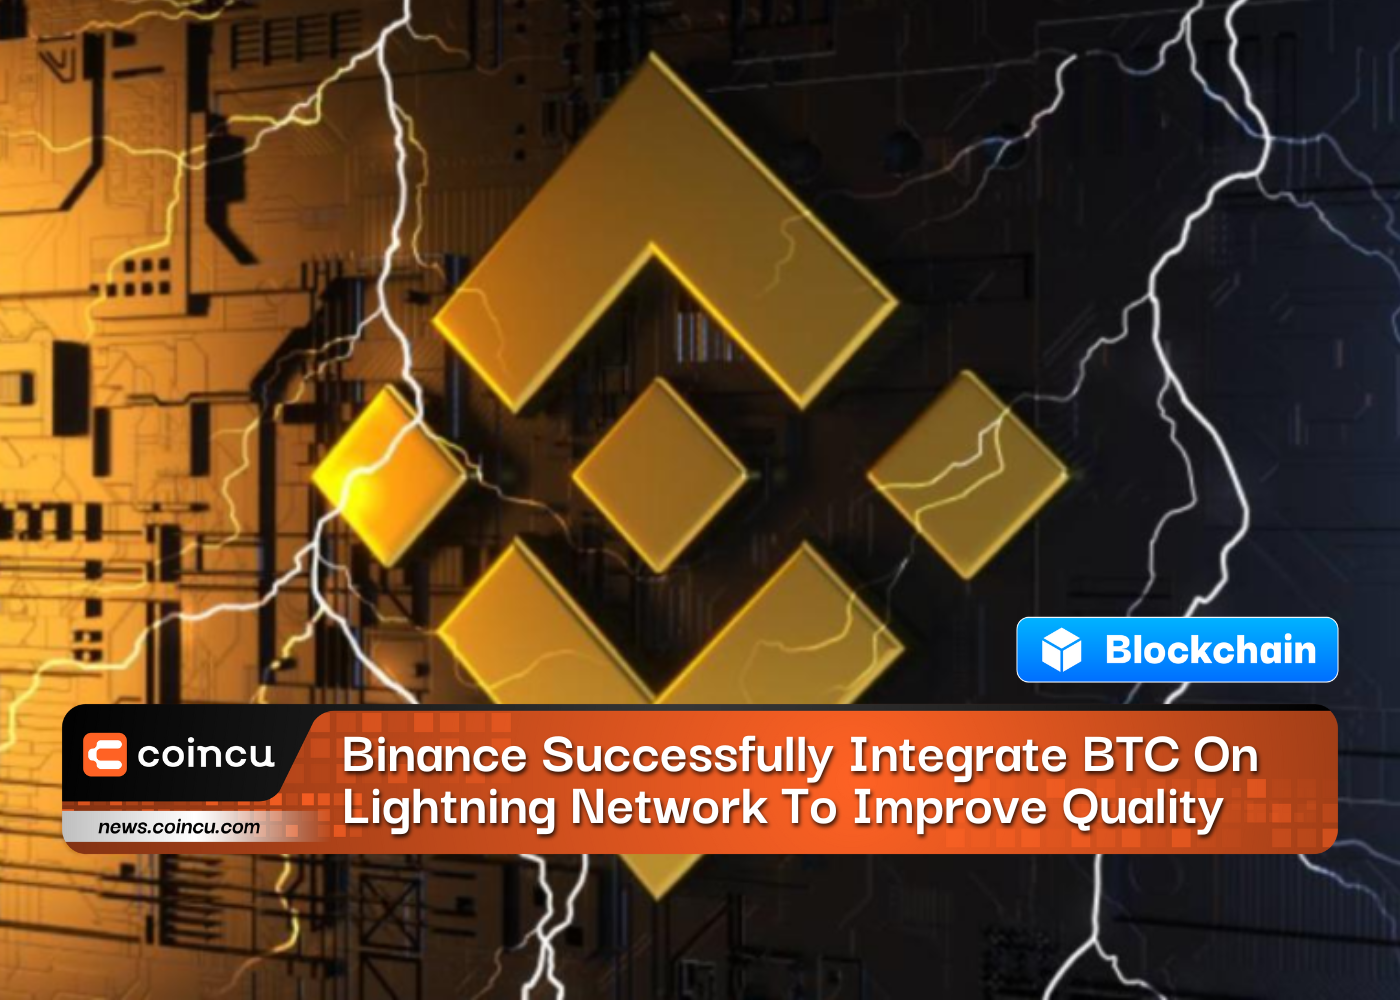 Binance Successfully Integrate BTC On Lightning Network To Improve Quality